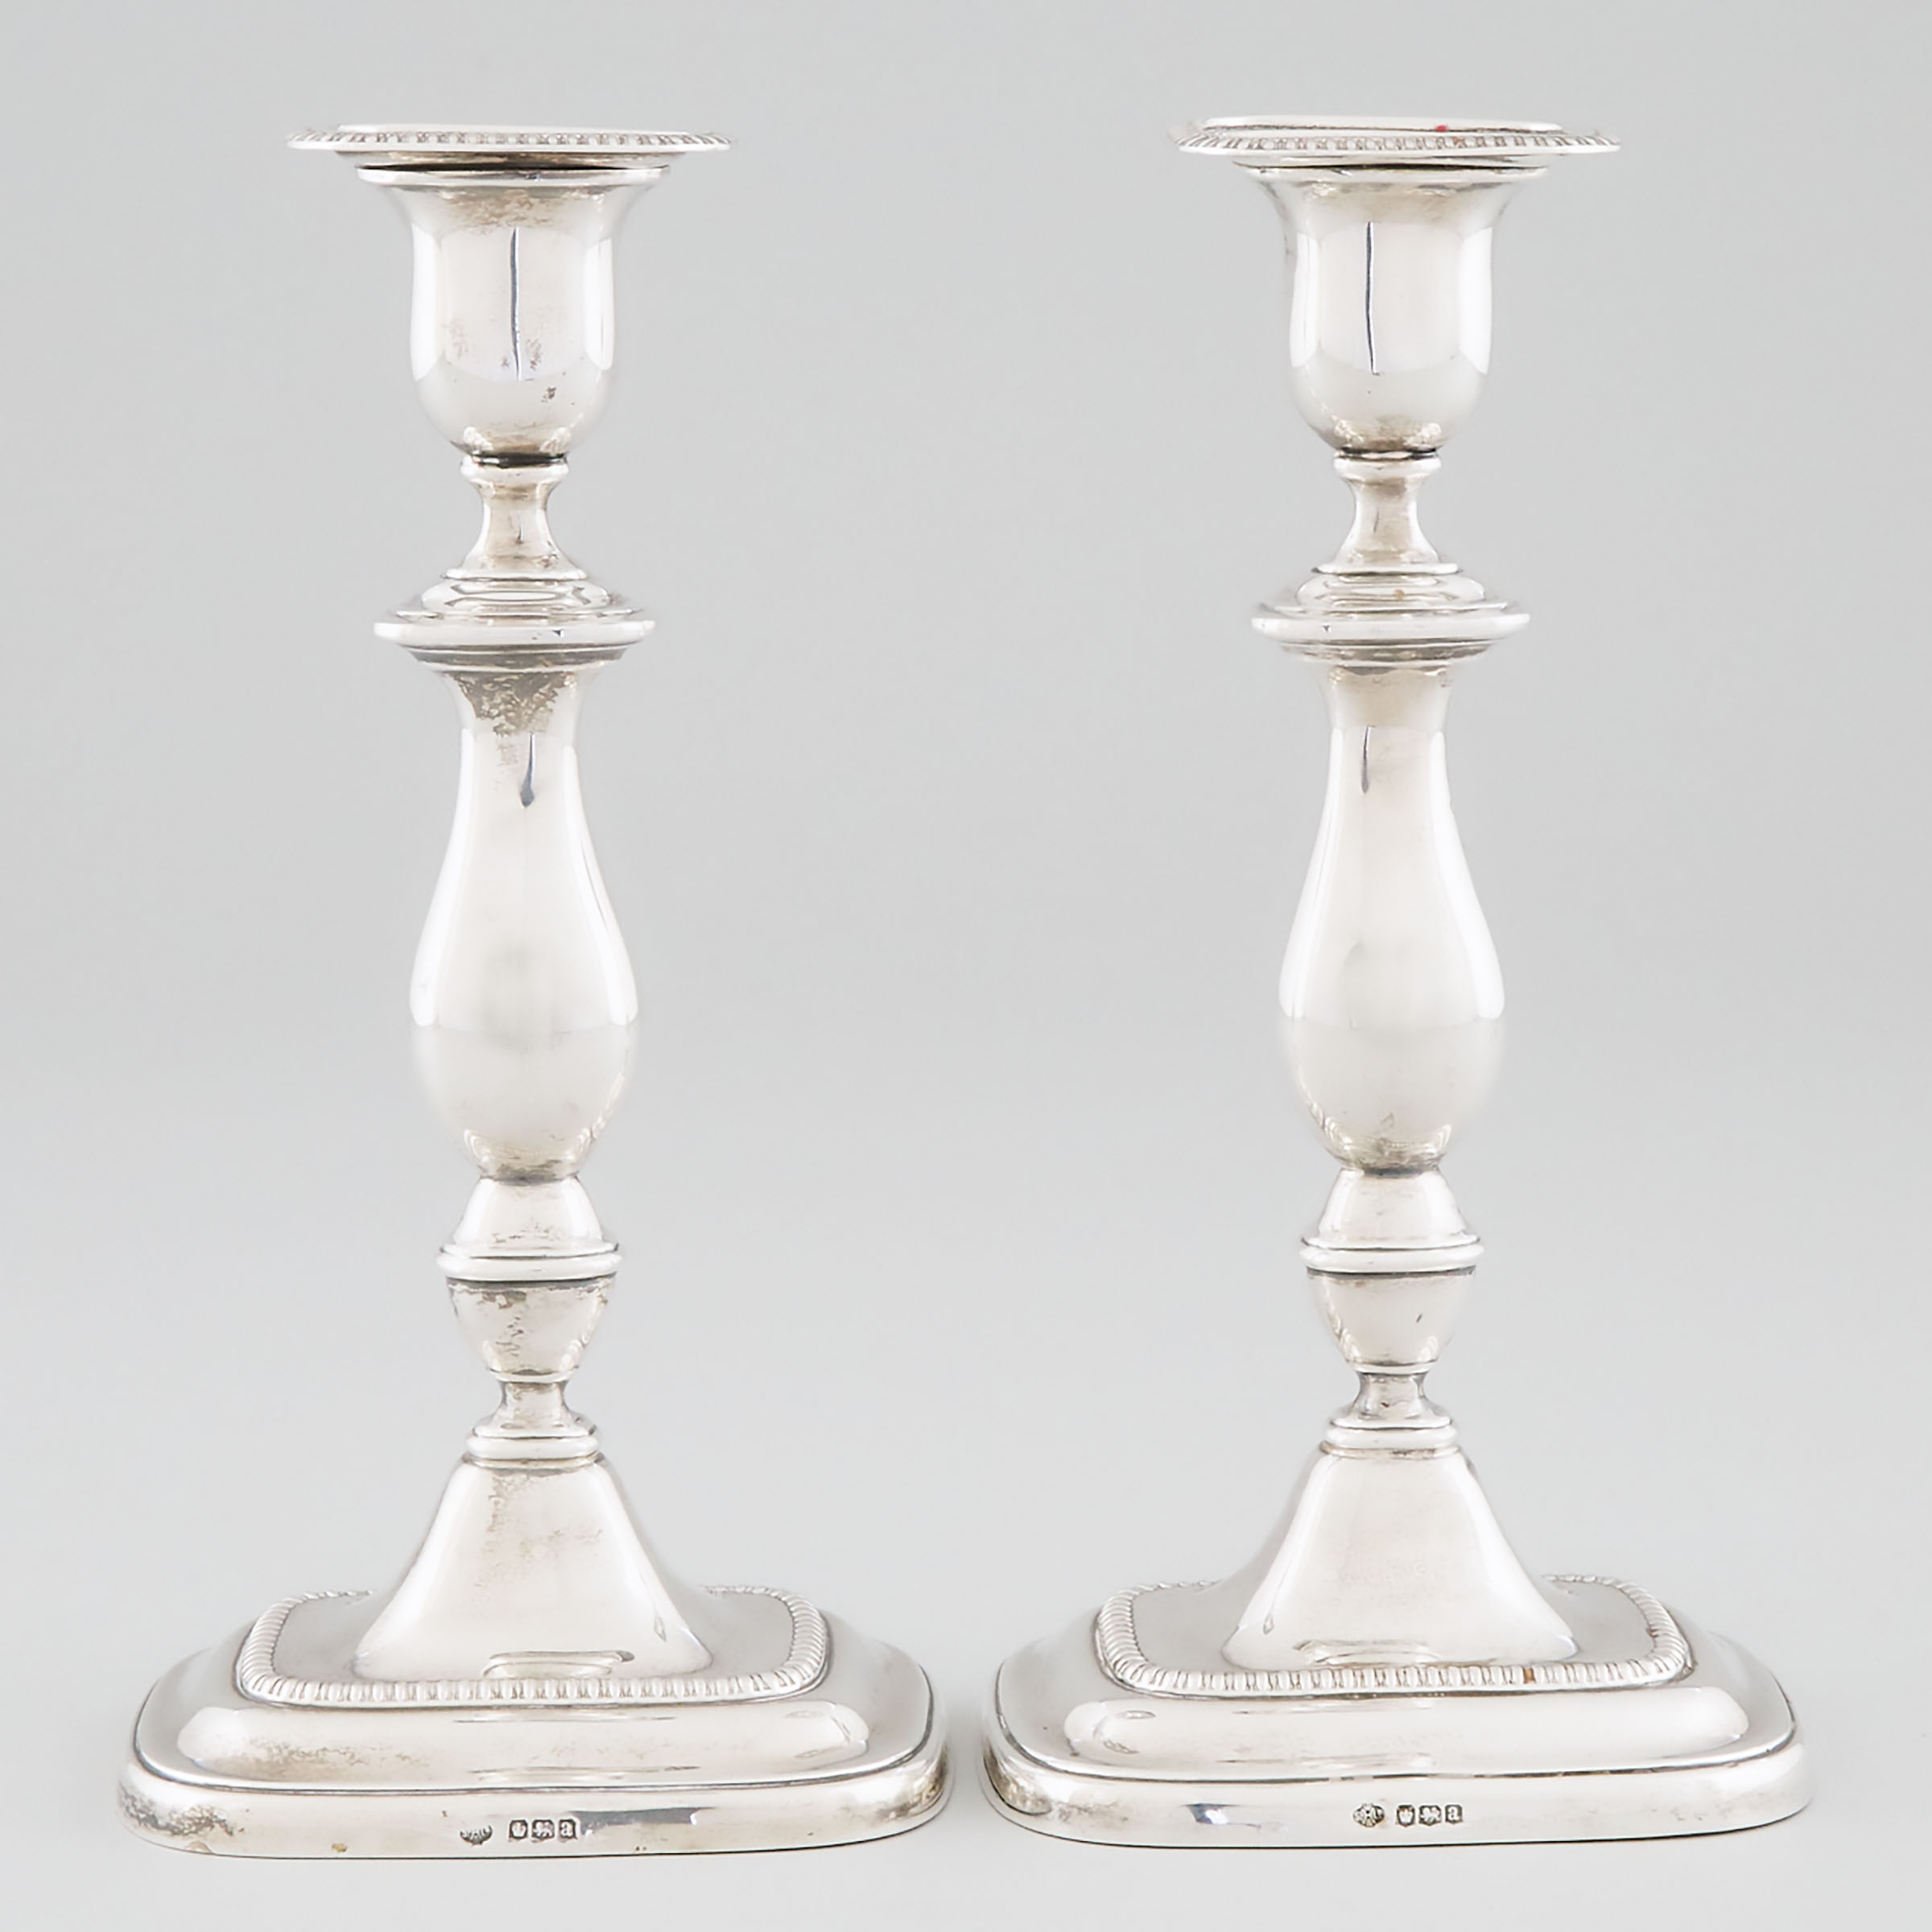 Pair of English Silver Table Candlesticks, William Hutton & Sons, Sheffield, 1918